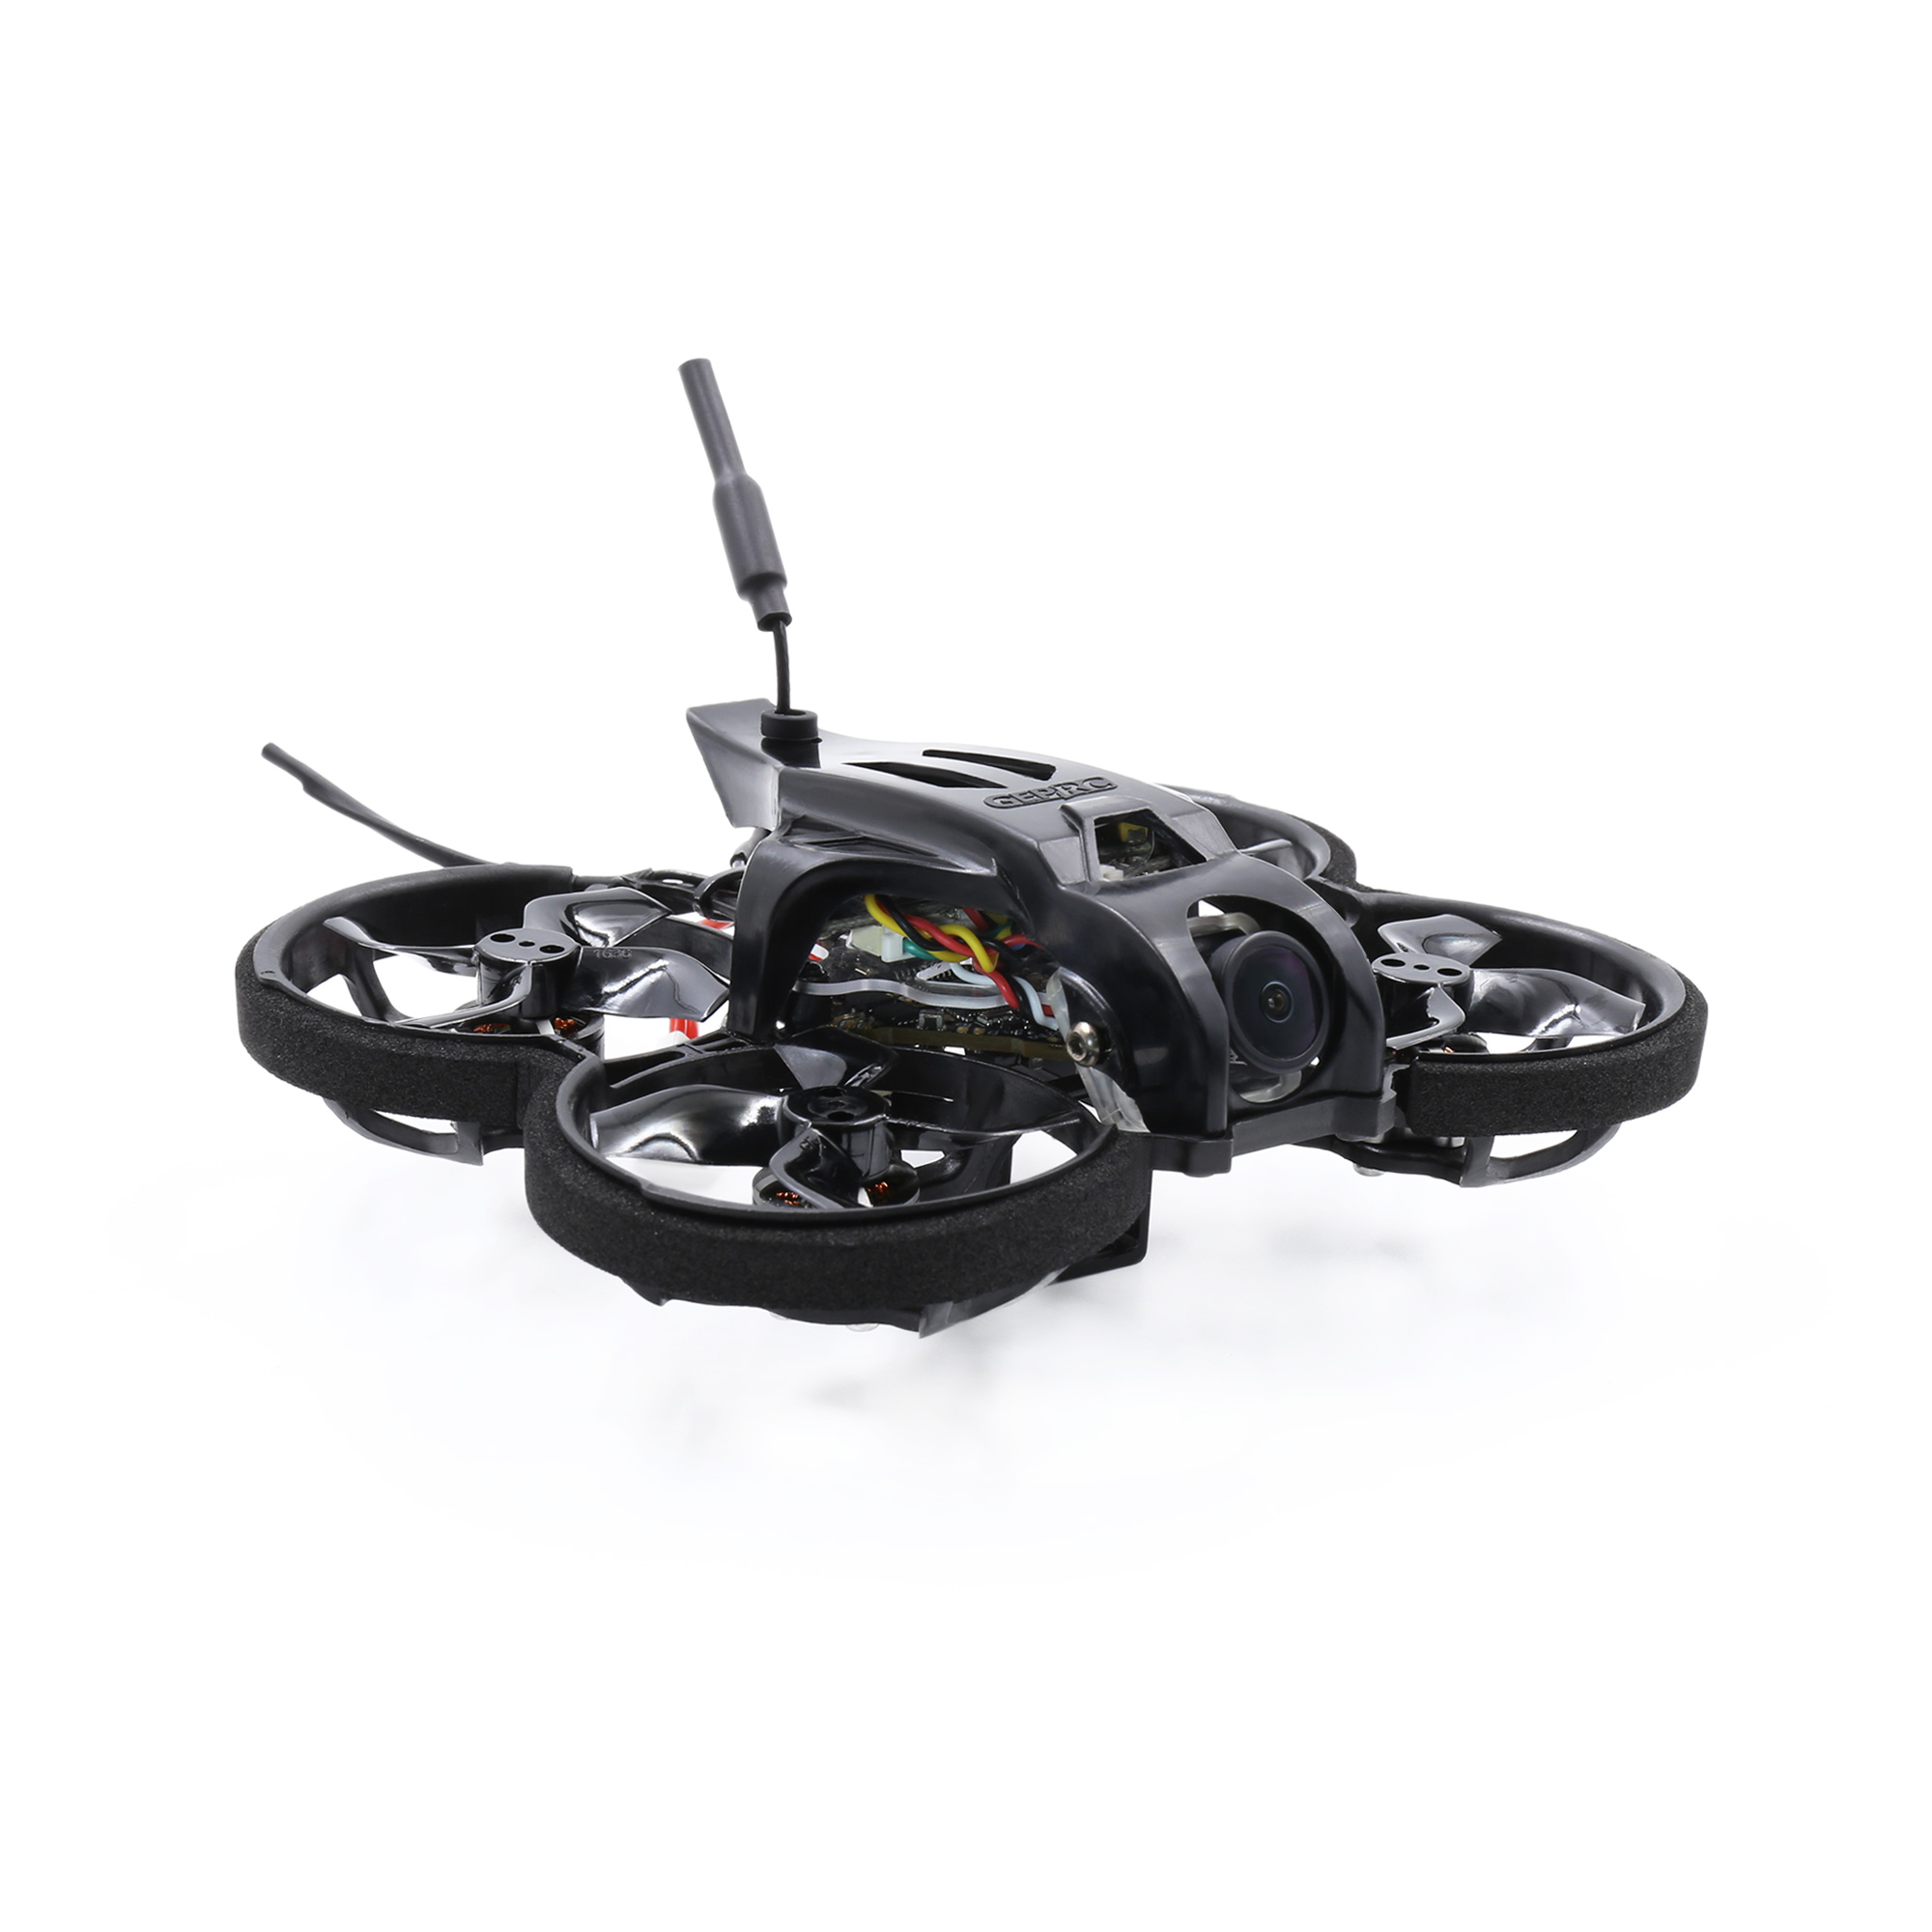 GEPRC-TinyGO-16inch-2S-FPV-Indoor-Whoop-Runcam-Nano2-GR8-Remote-ControllerRG1-Goggles-RTF-Ready-To-F-1788771-6